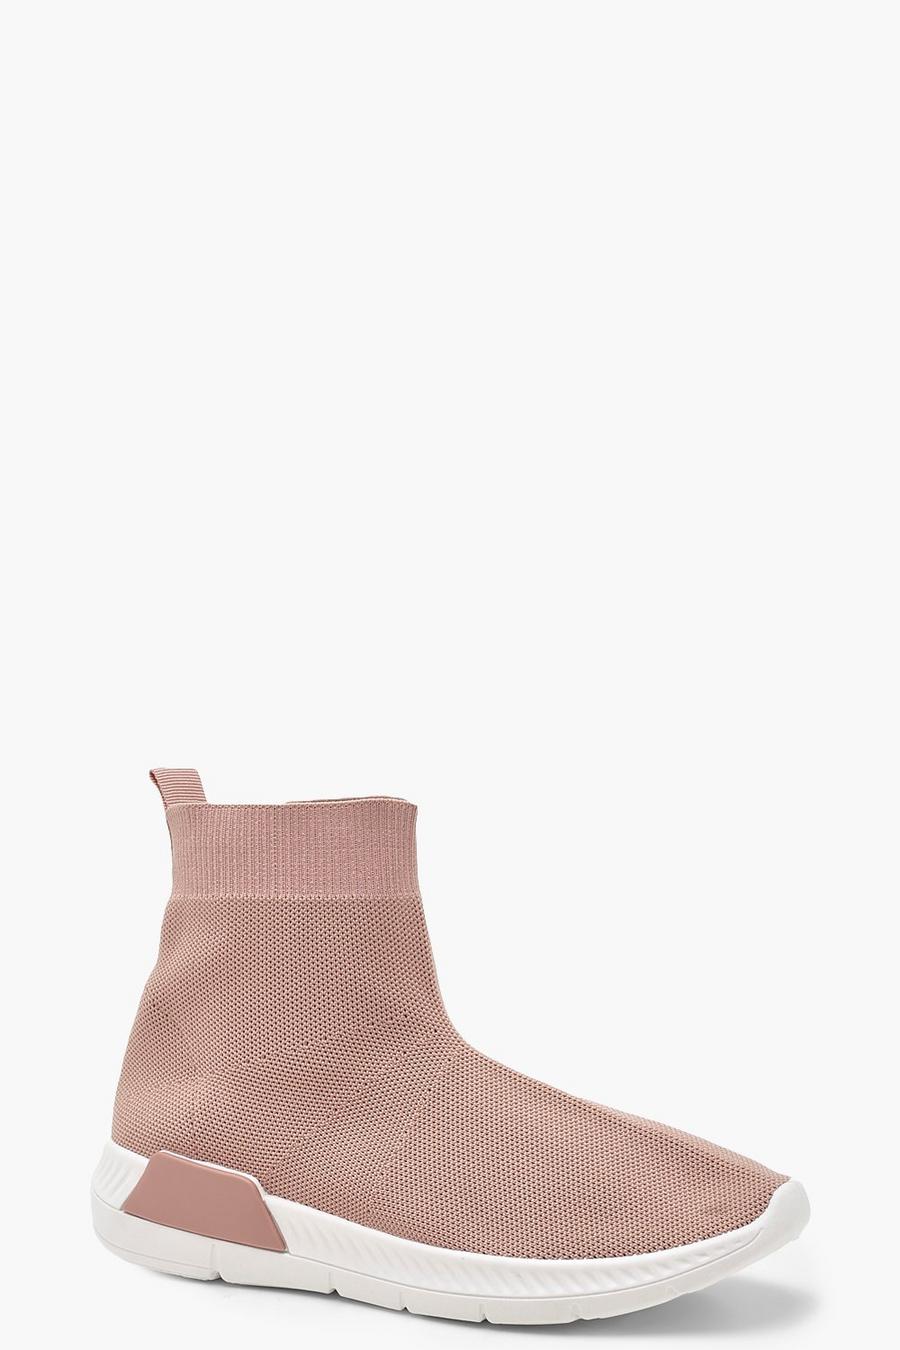 Blush Knitted Sock Sneakers image number 1